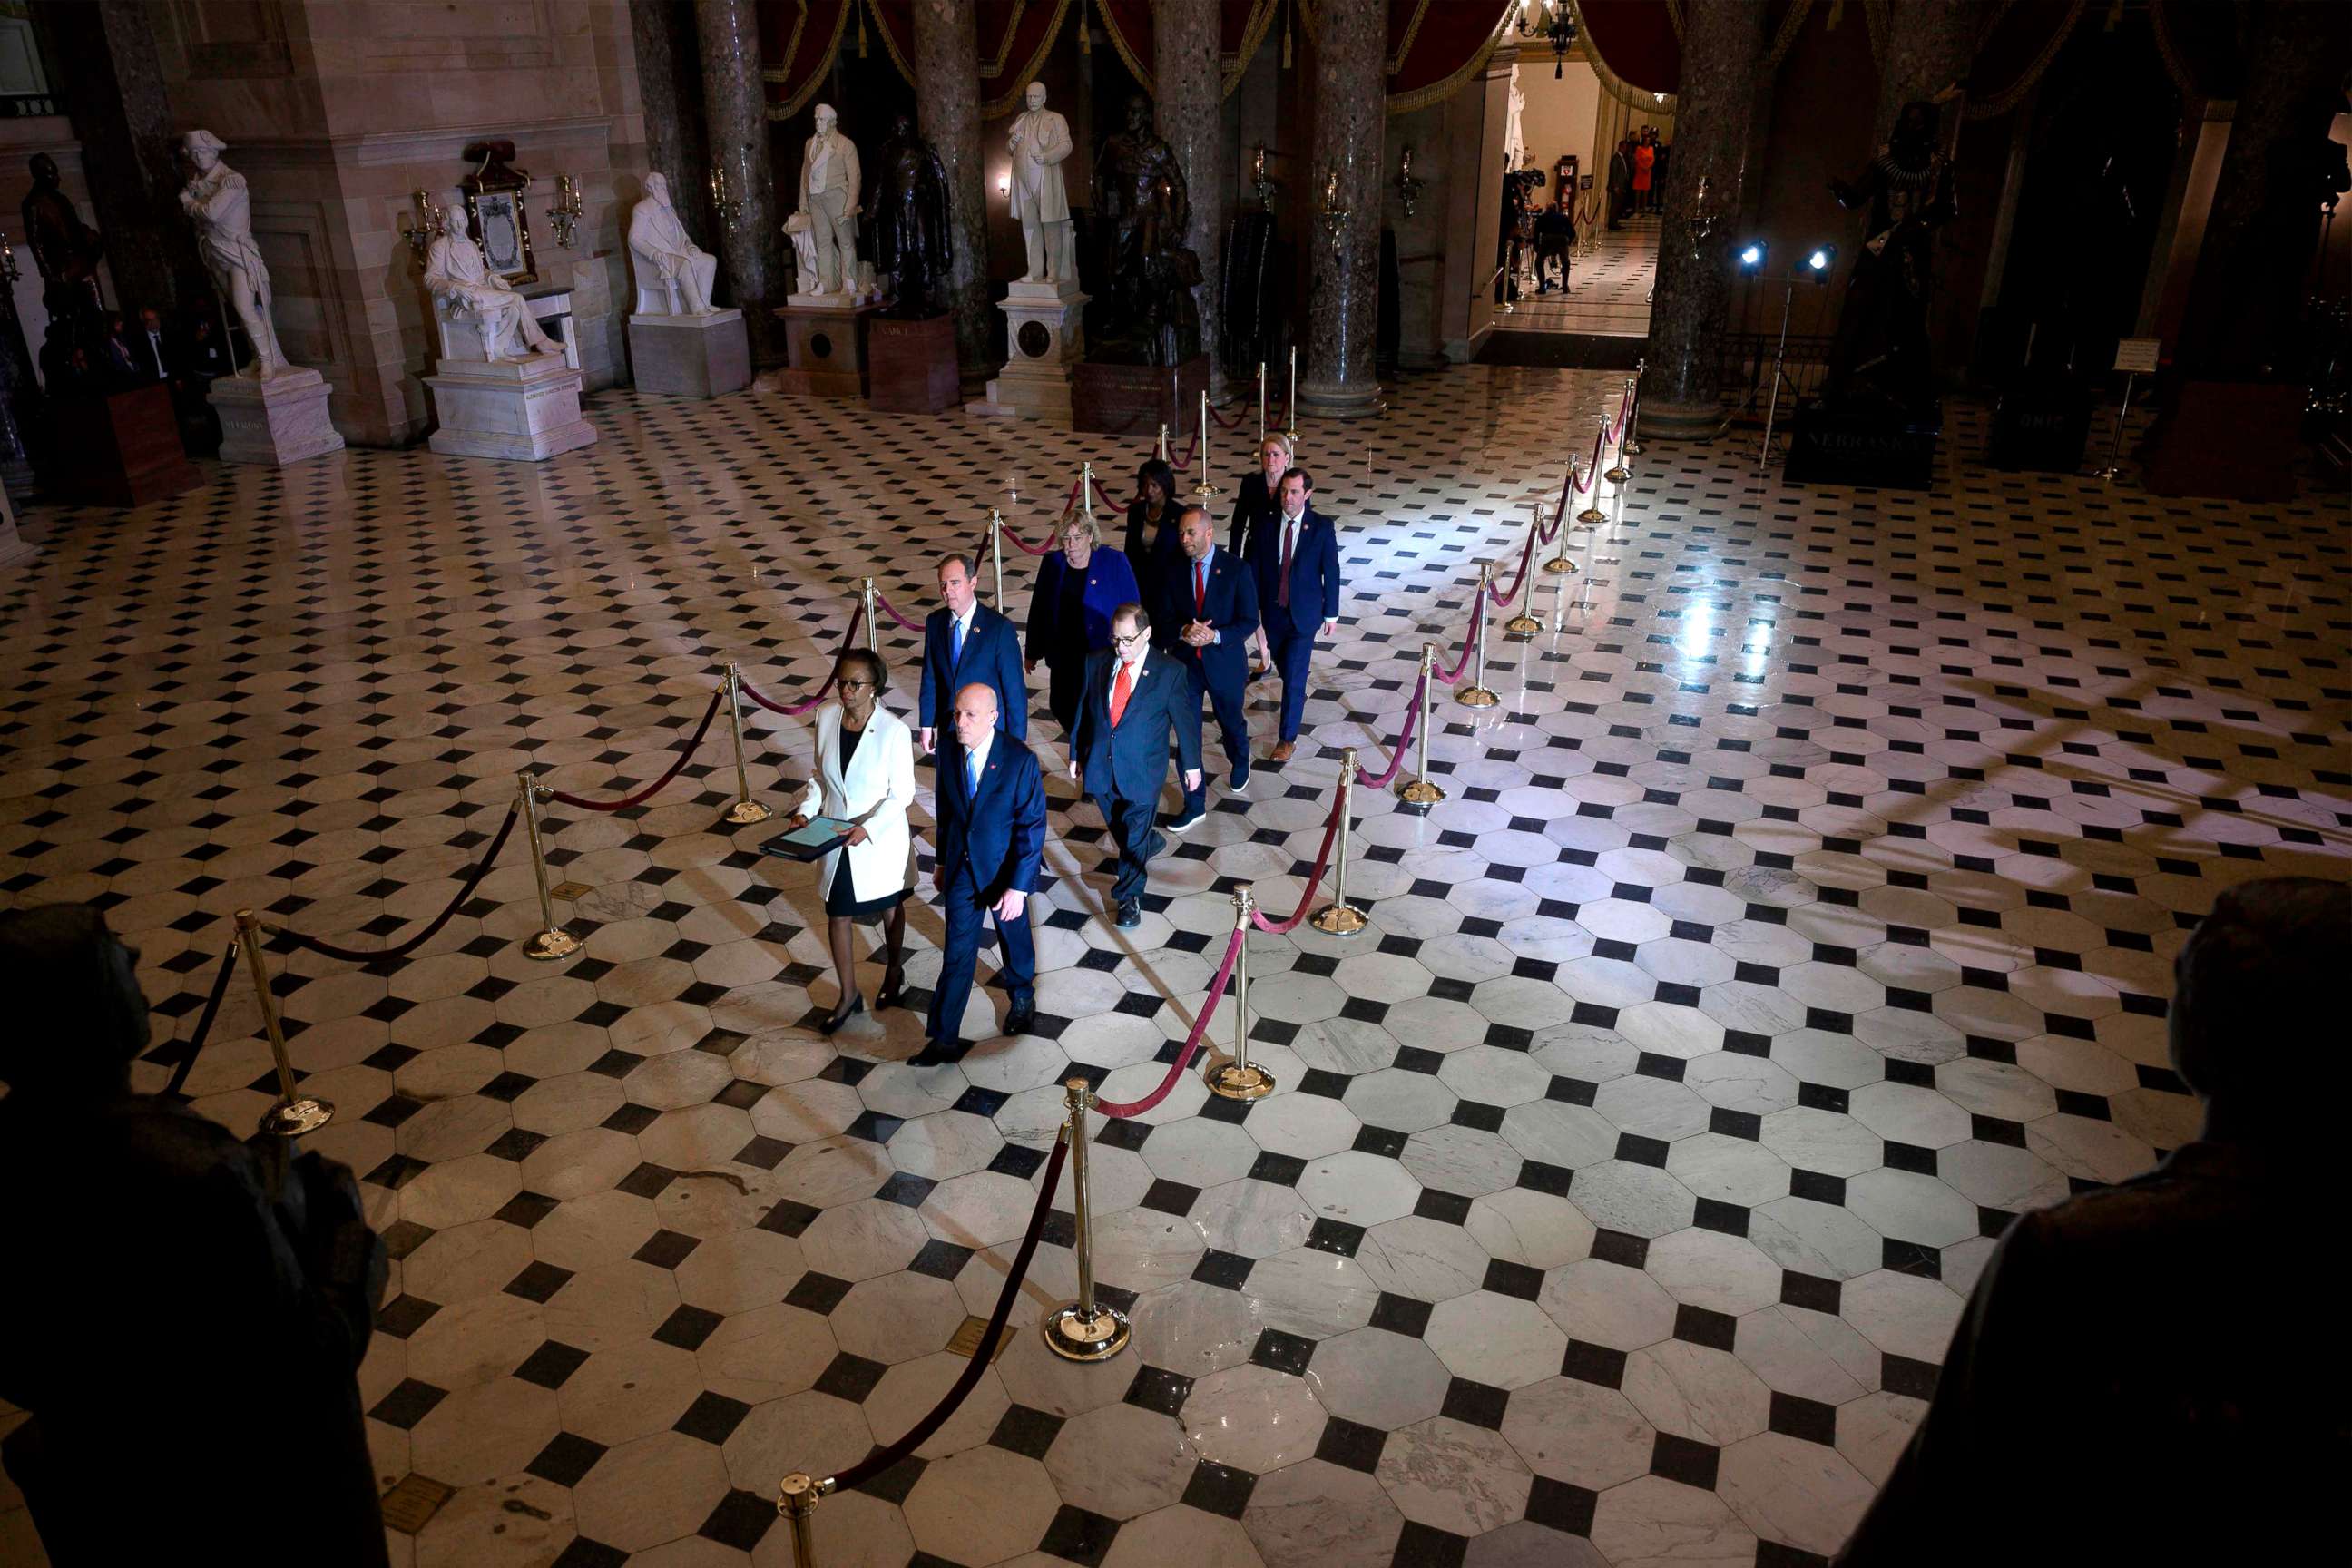 PHOTO: House Managers walk to the US Senate to deliver the Articles of Impeachment against US President Donald Trump on Capitol Hill, Jan. 15, 2020, in Washington, DC.